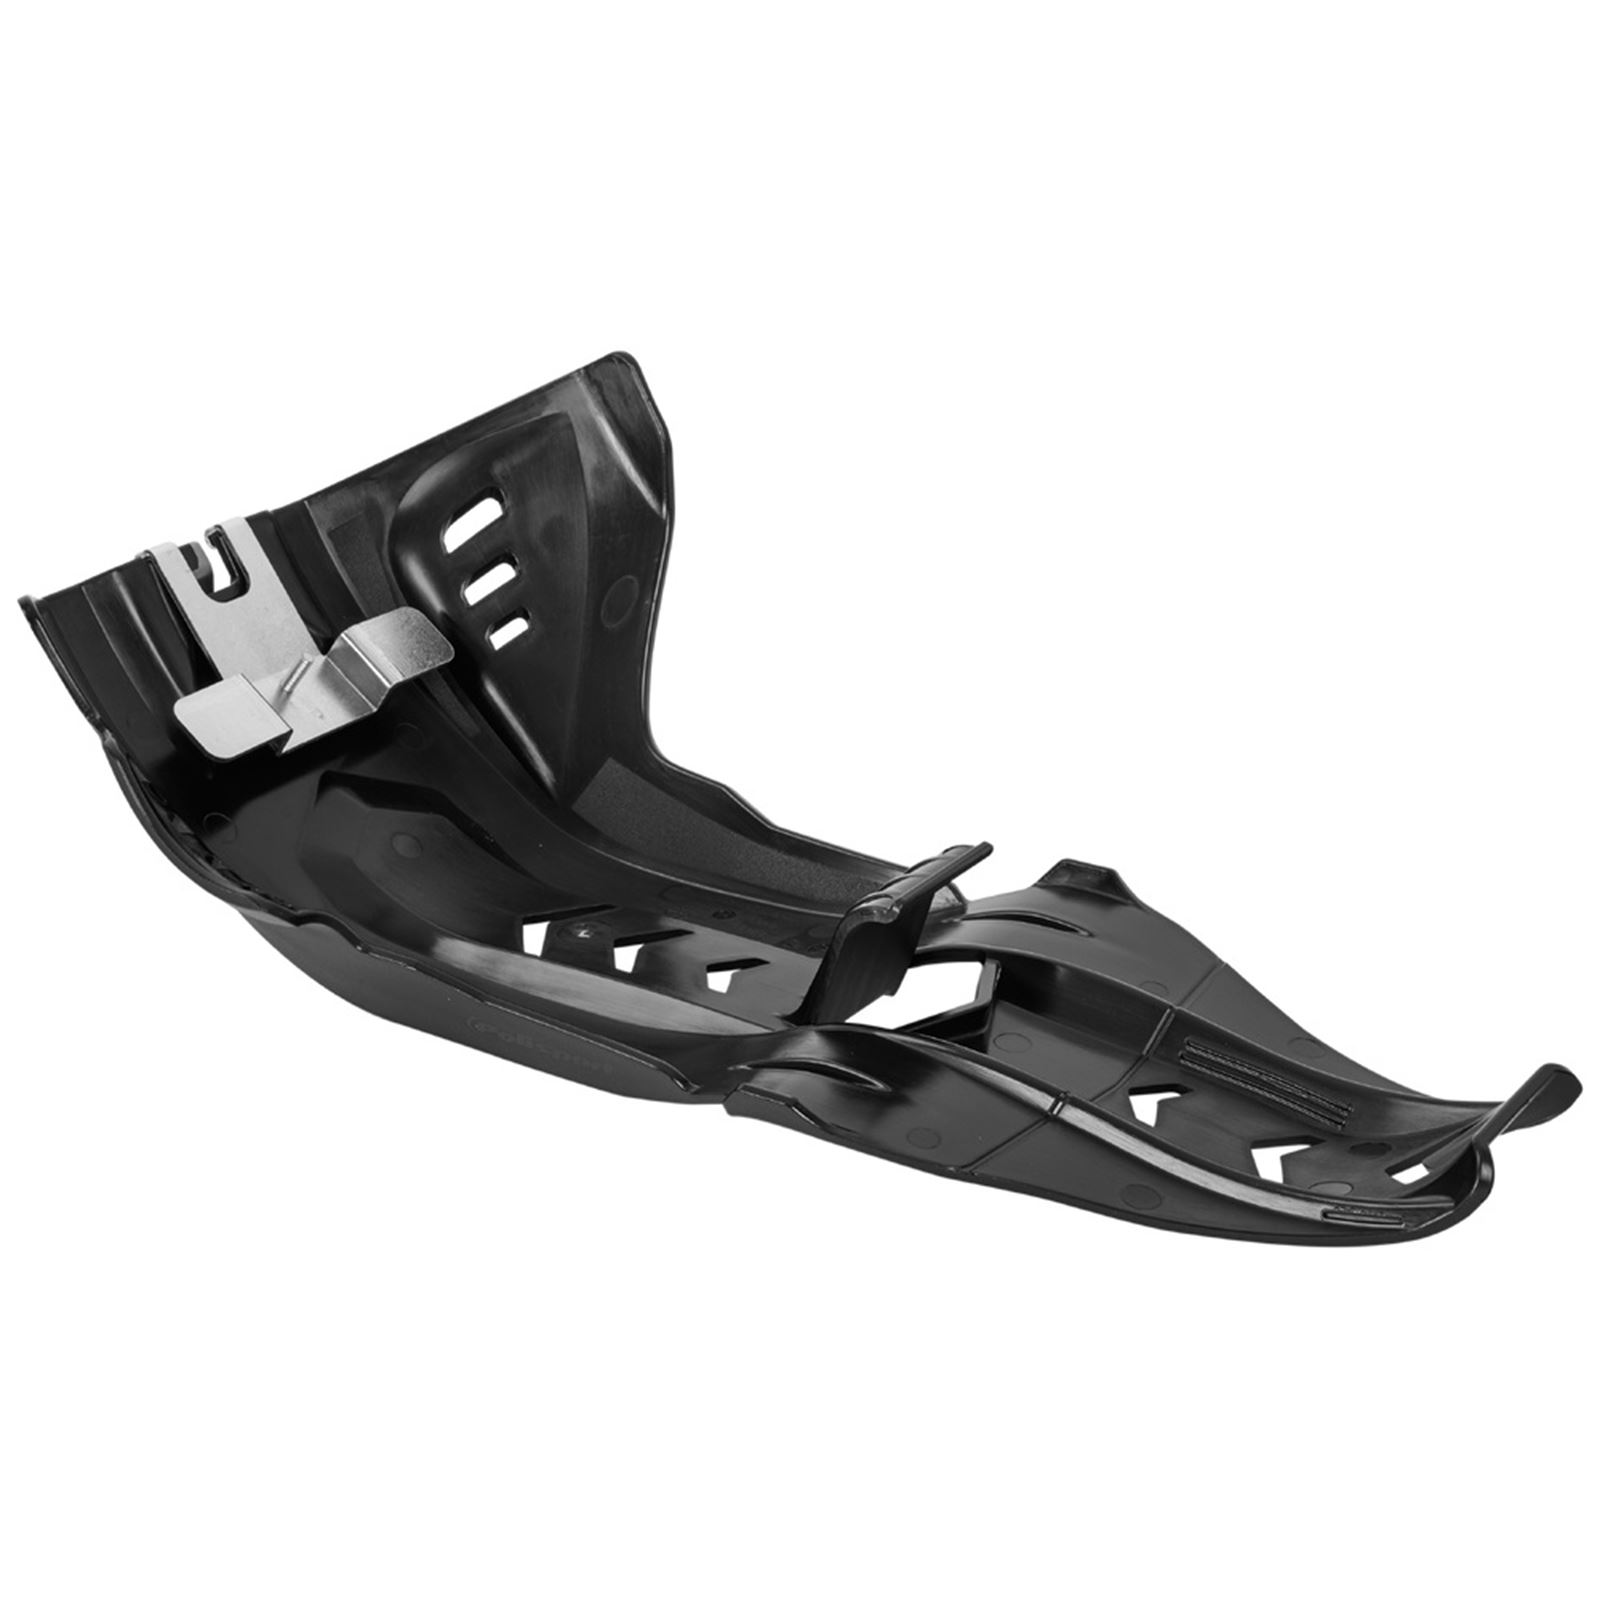 Polisport Fortress Skid Plate with Link Protector - Black